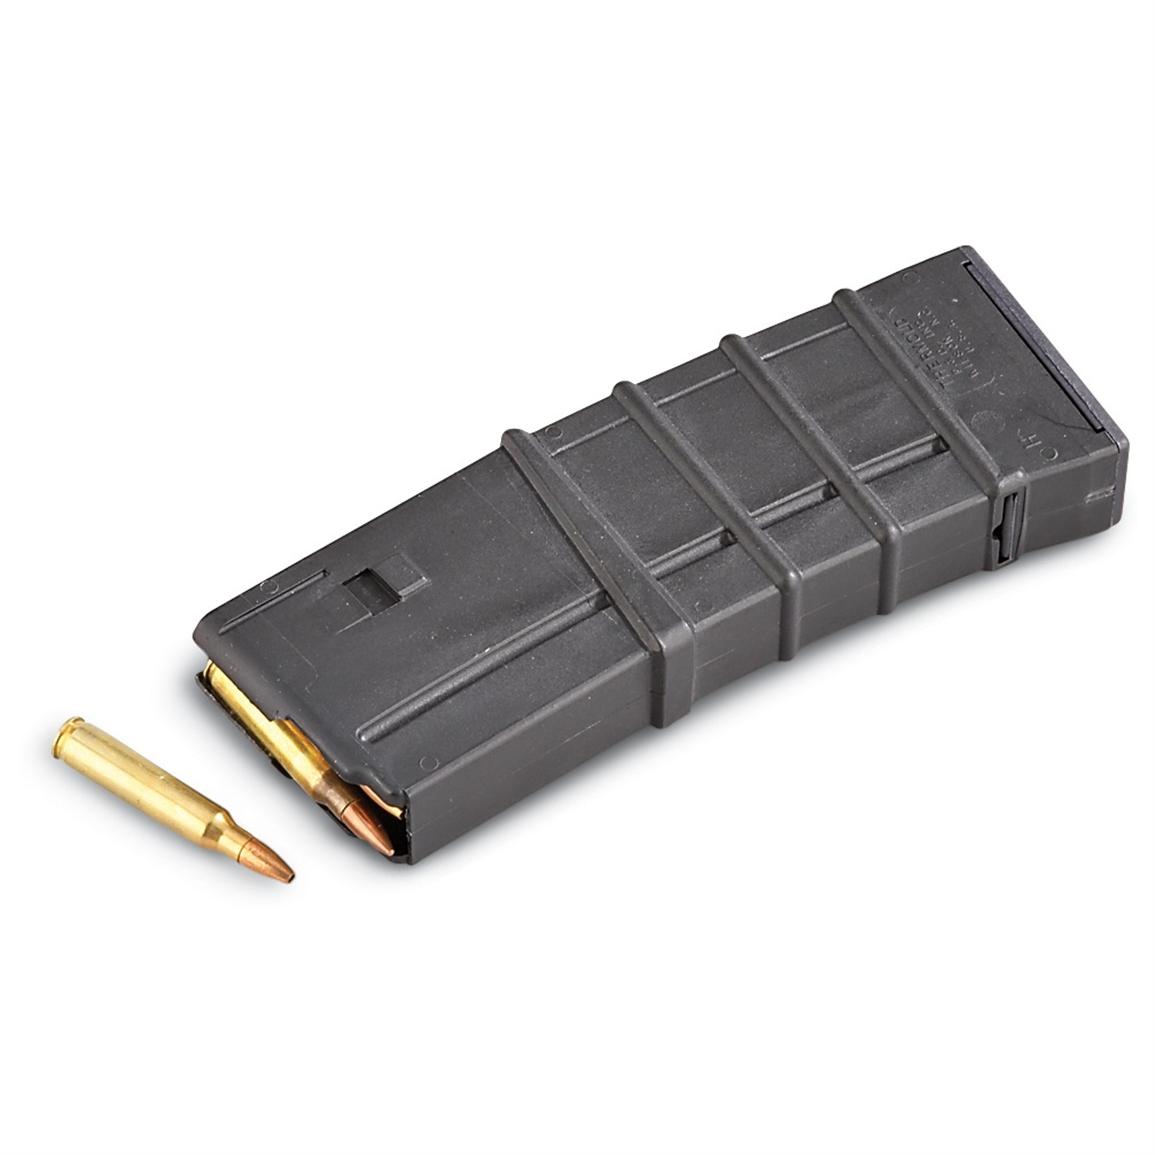 Thermold, AR-15 Magazine, 30 Round - 203485, Rifle Mags at Sportsman's...